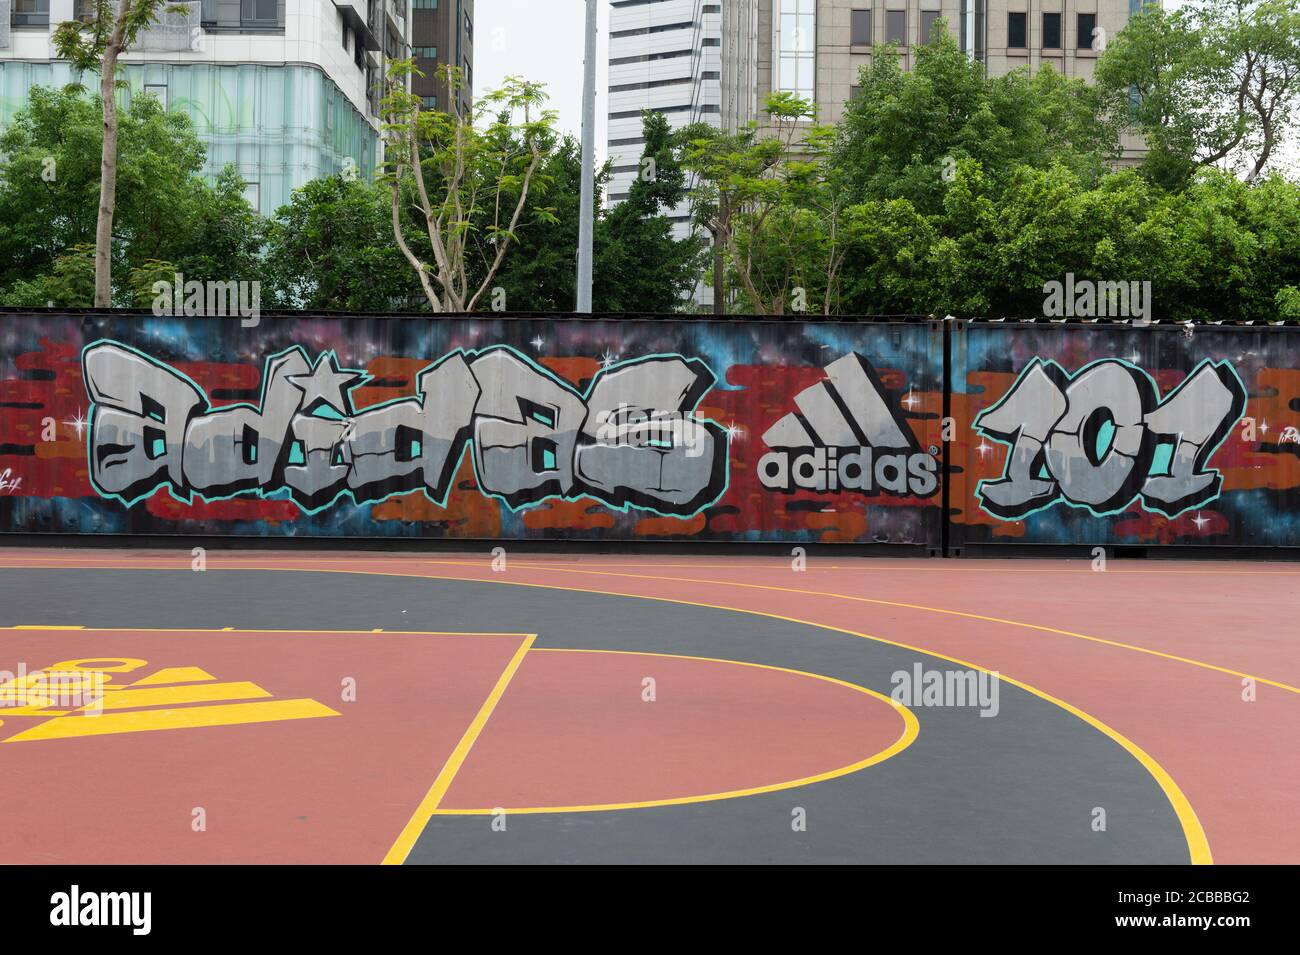 TAIPEI, TAIWAN - CIRCA February, 2018: Close up shot of Adidas logo. Adidas  AG is a German corporation, the largest sportswear manufacturer in Europe  Stock Photo - Alamy